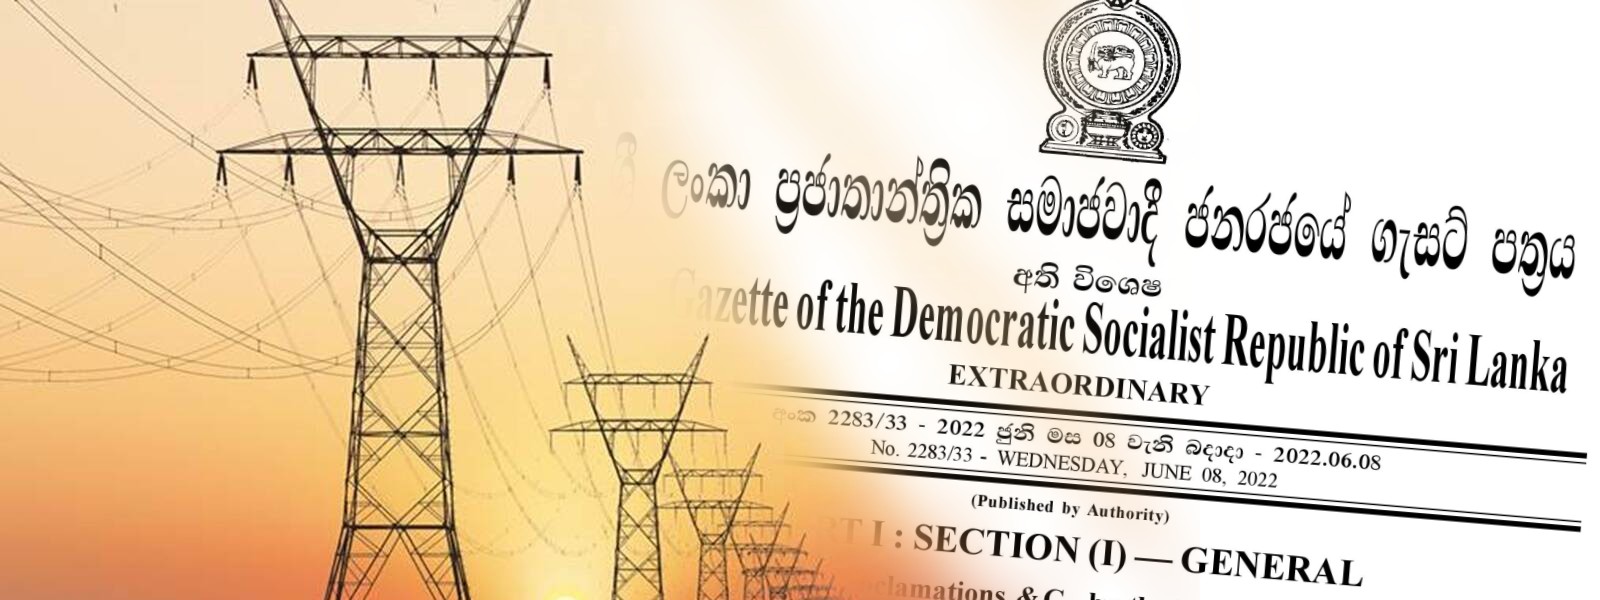 Electricity Supply & Hospital Operations declared essential services